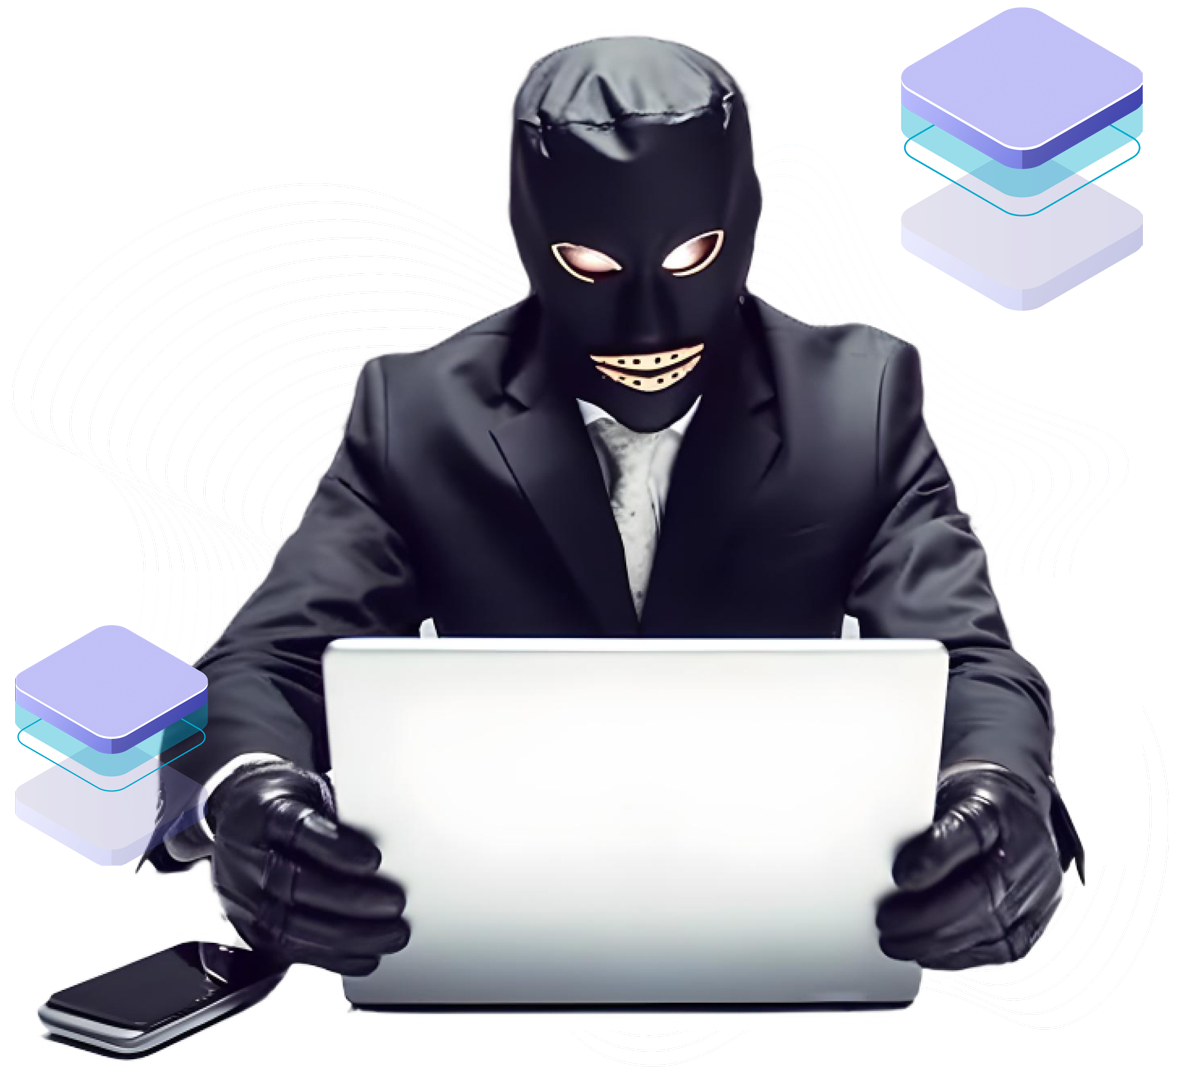 A man in a mask is sitting in front of a laptop